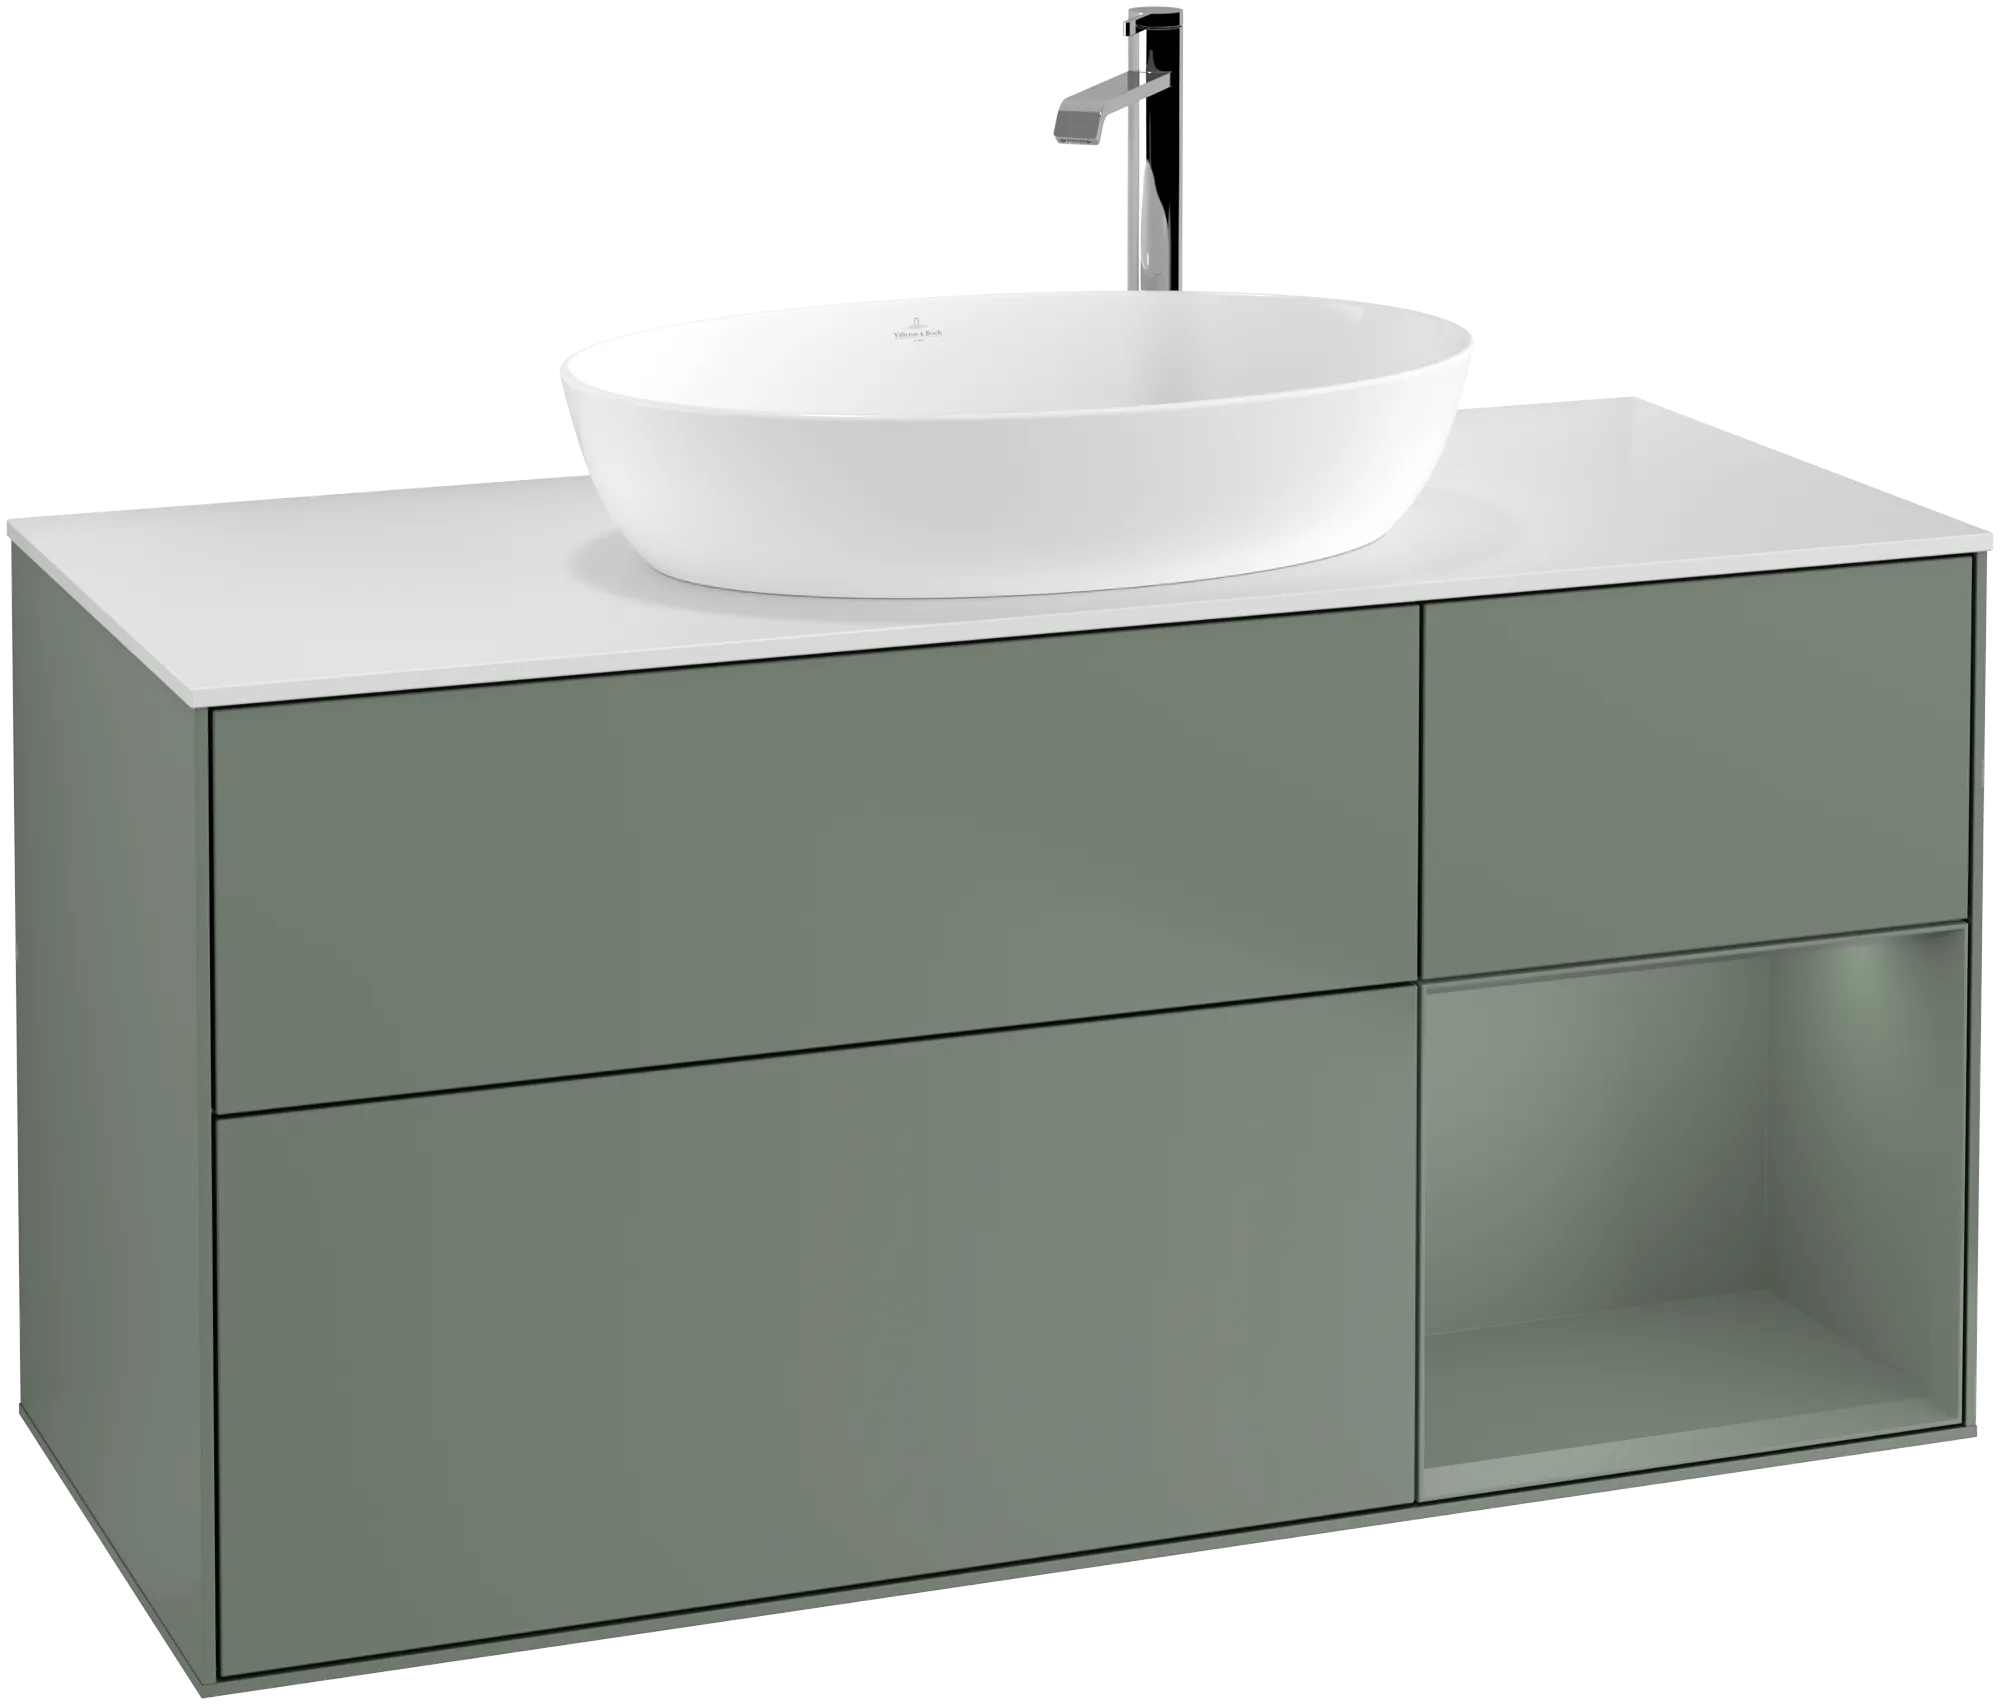 VILLEROY BOCH Finion Vanity unit, with lighting, 3 pull-out compartments, 1200 x 603 x 501 mm, Olive Matt Lacquer / Olive Matt Lacquer / Glass White Matt #G951GMGM resmi